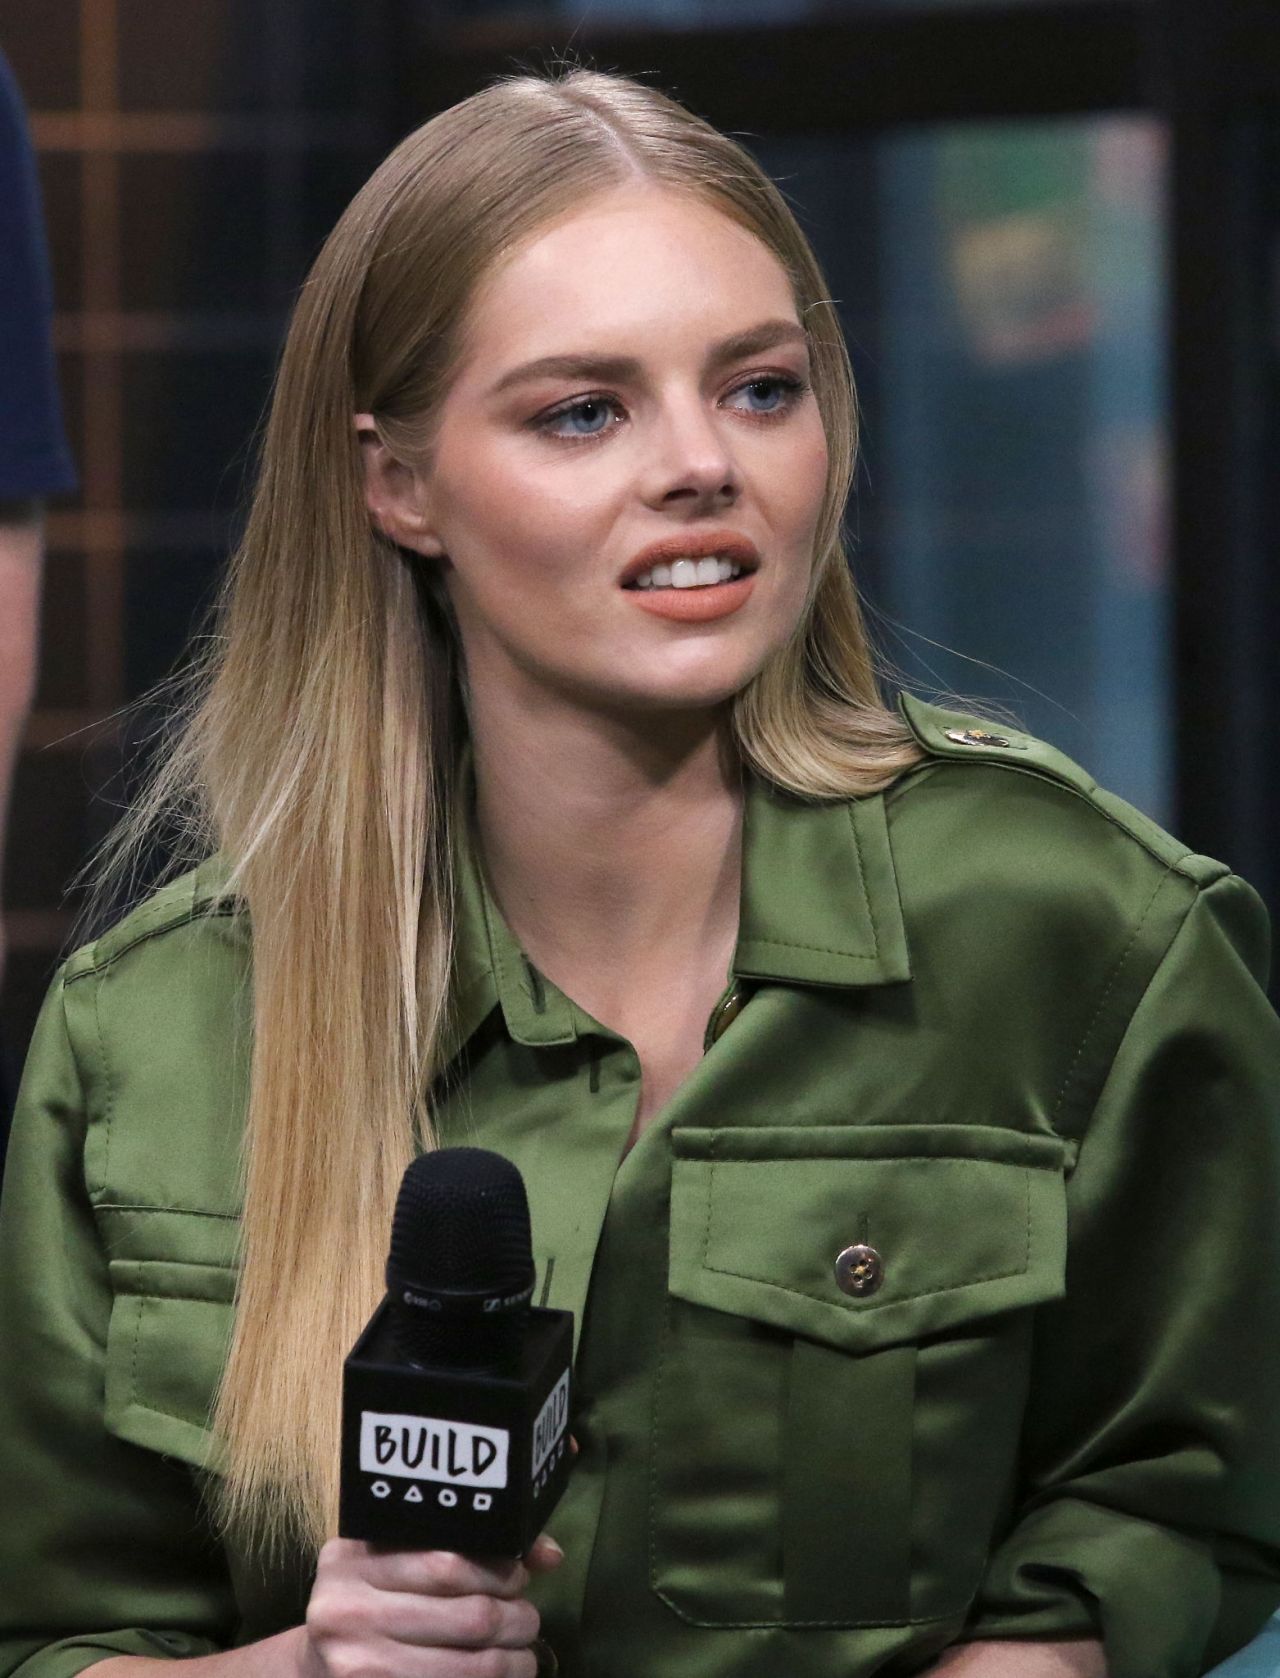 samara-weaving-discussing-ready-or-not-at-build-studio-in-nyc-08-22-2019-5.jpg